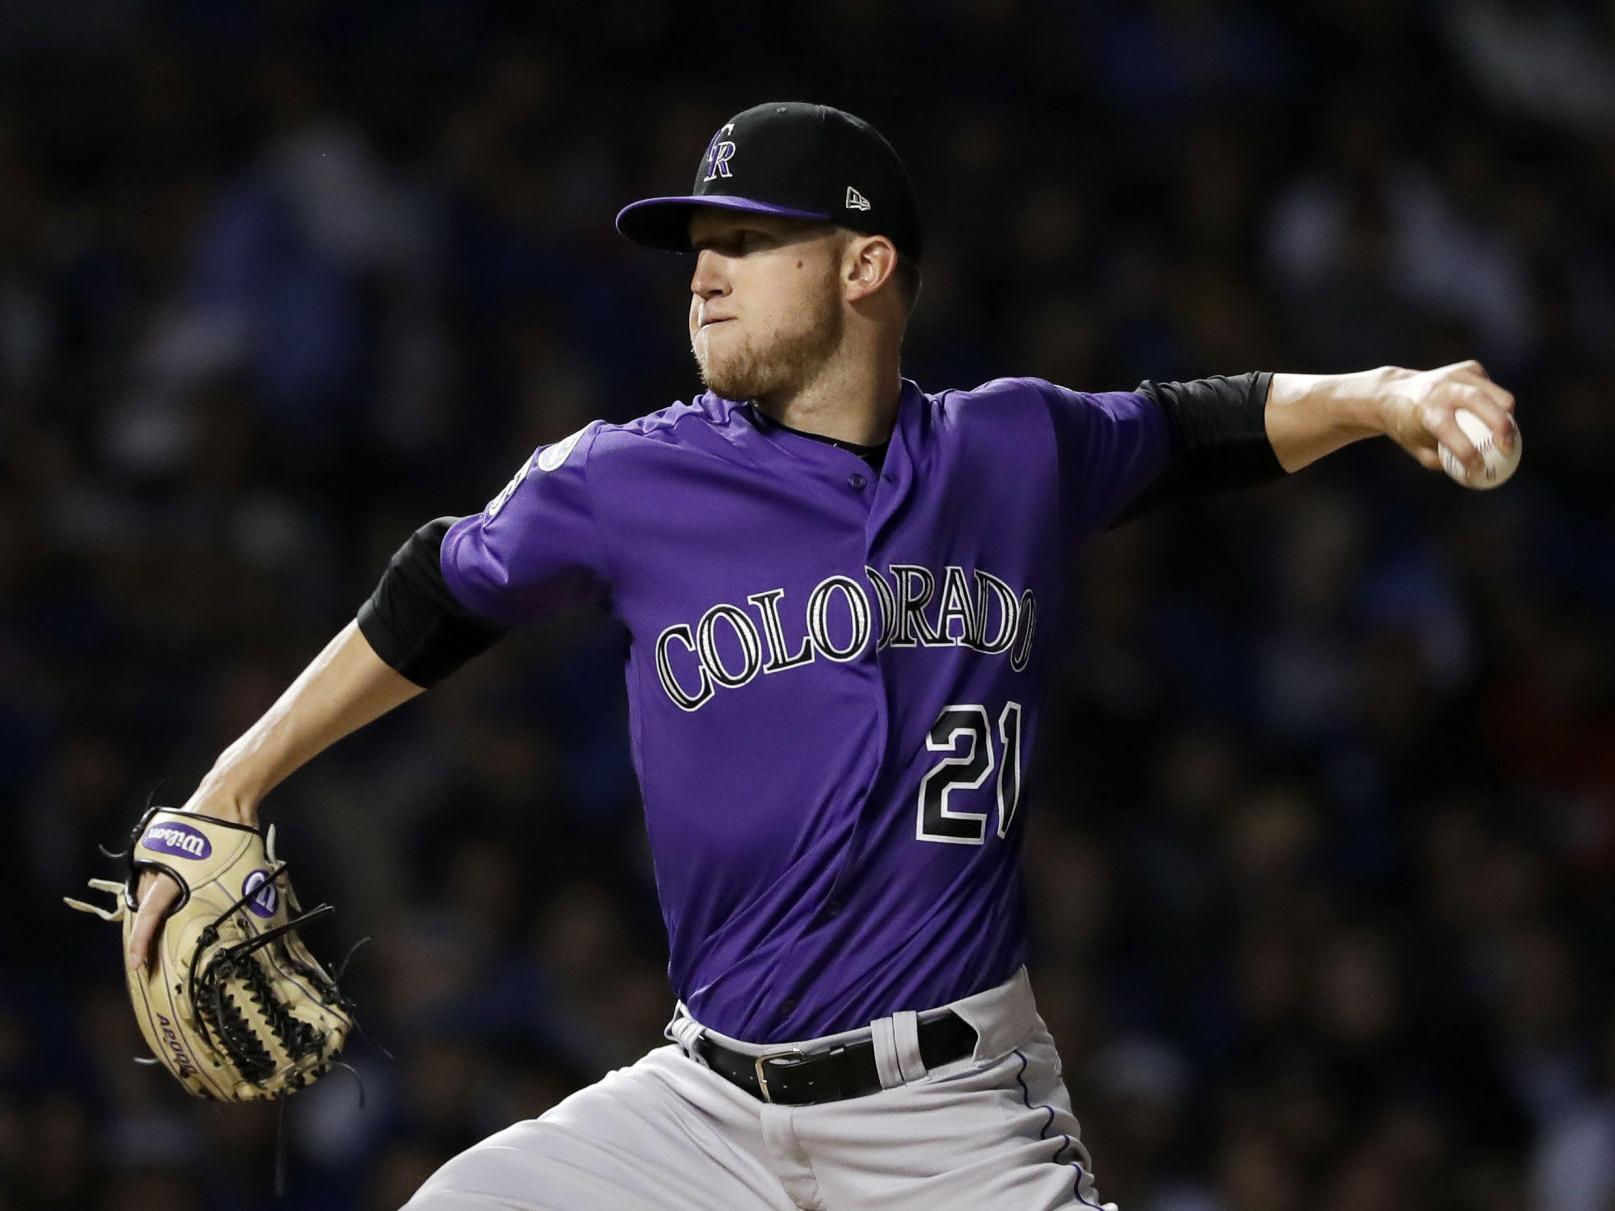 Ranking the Current Rockies Uniforms From Worst To Best